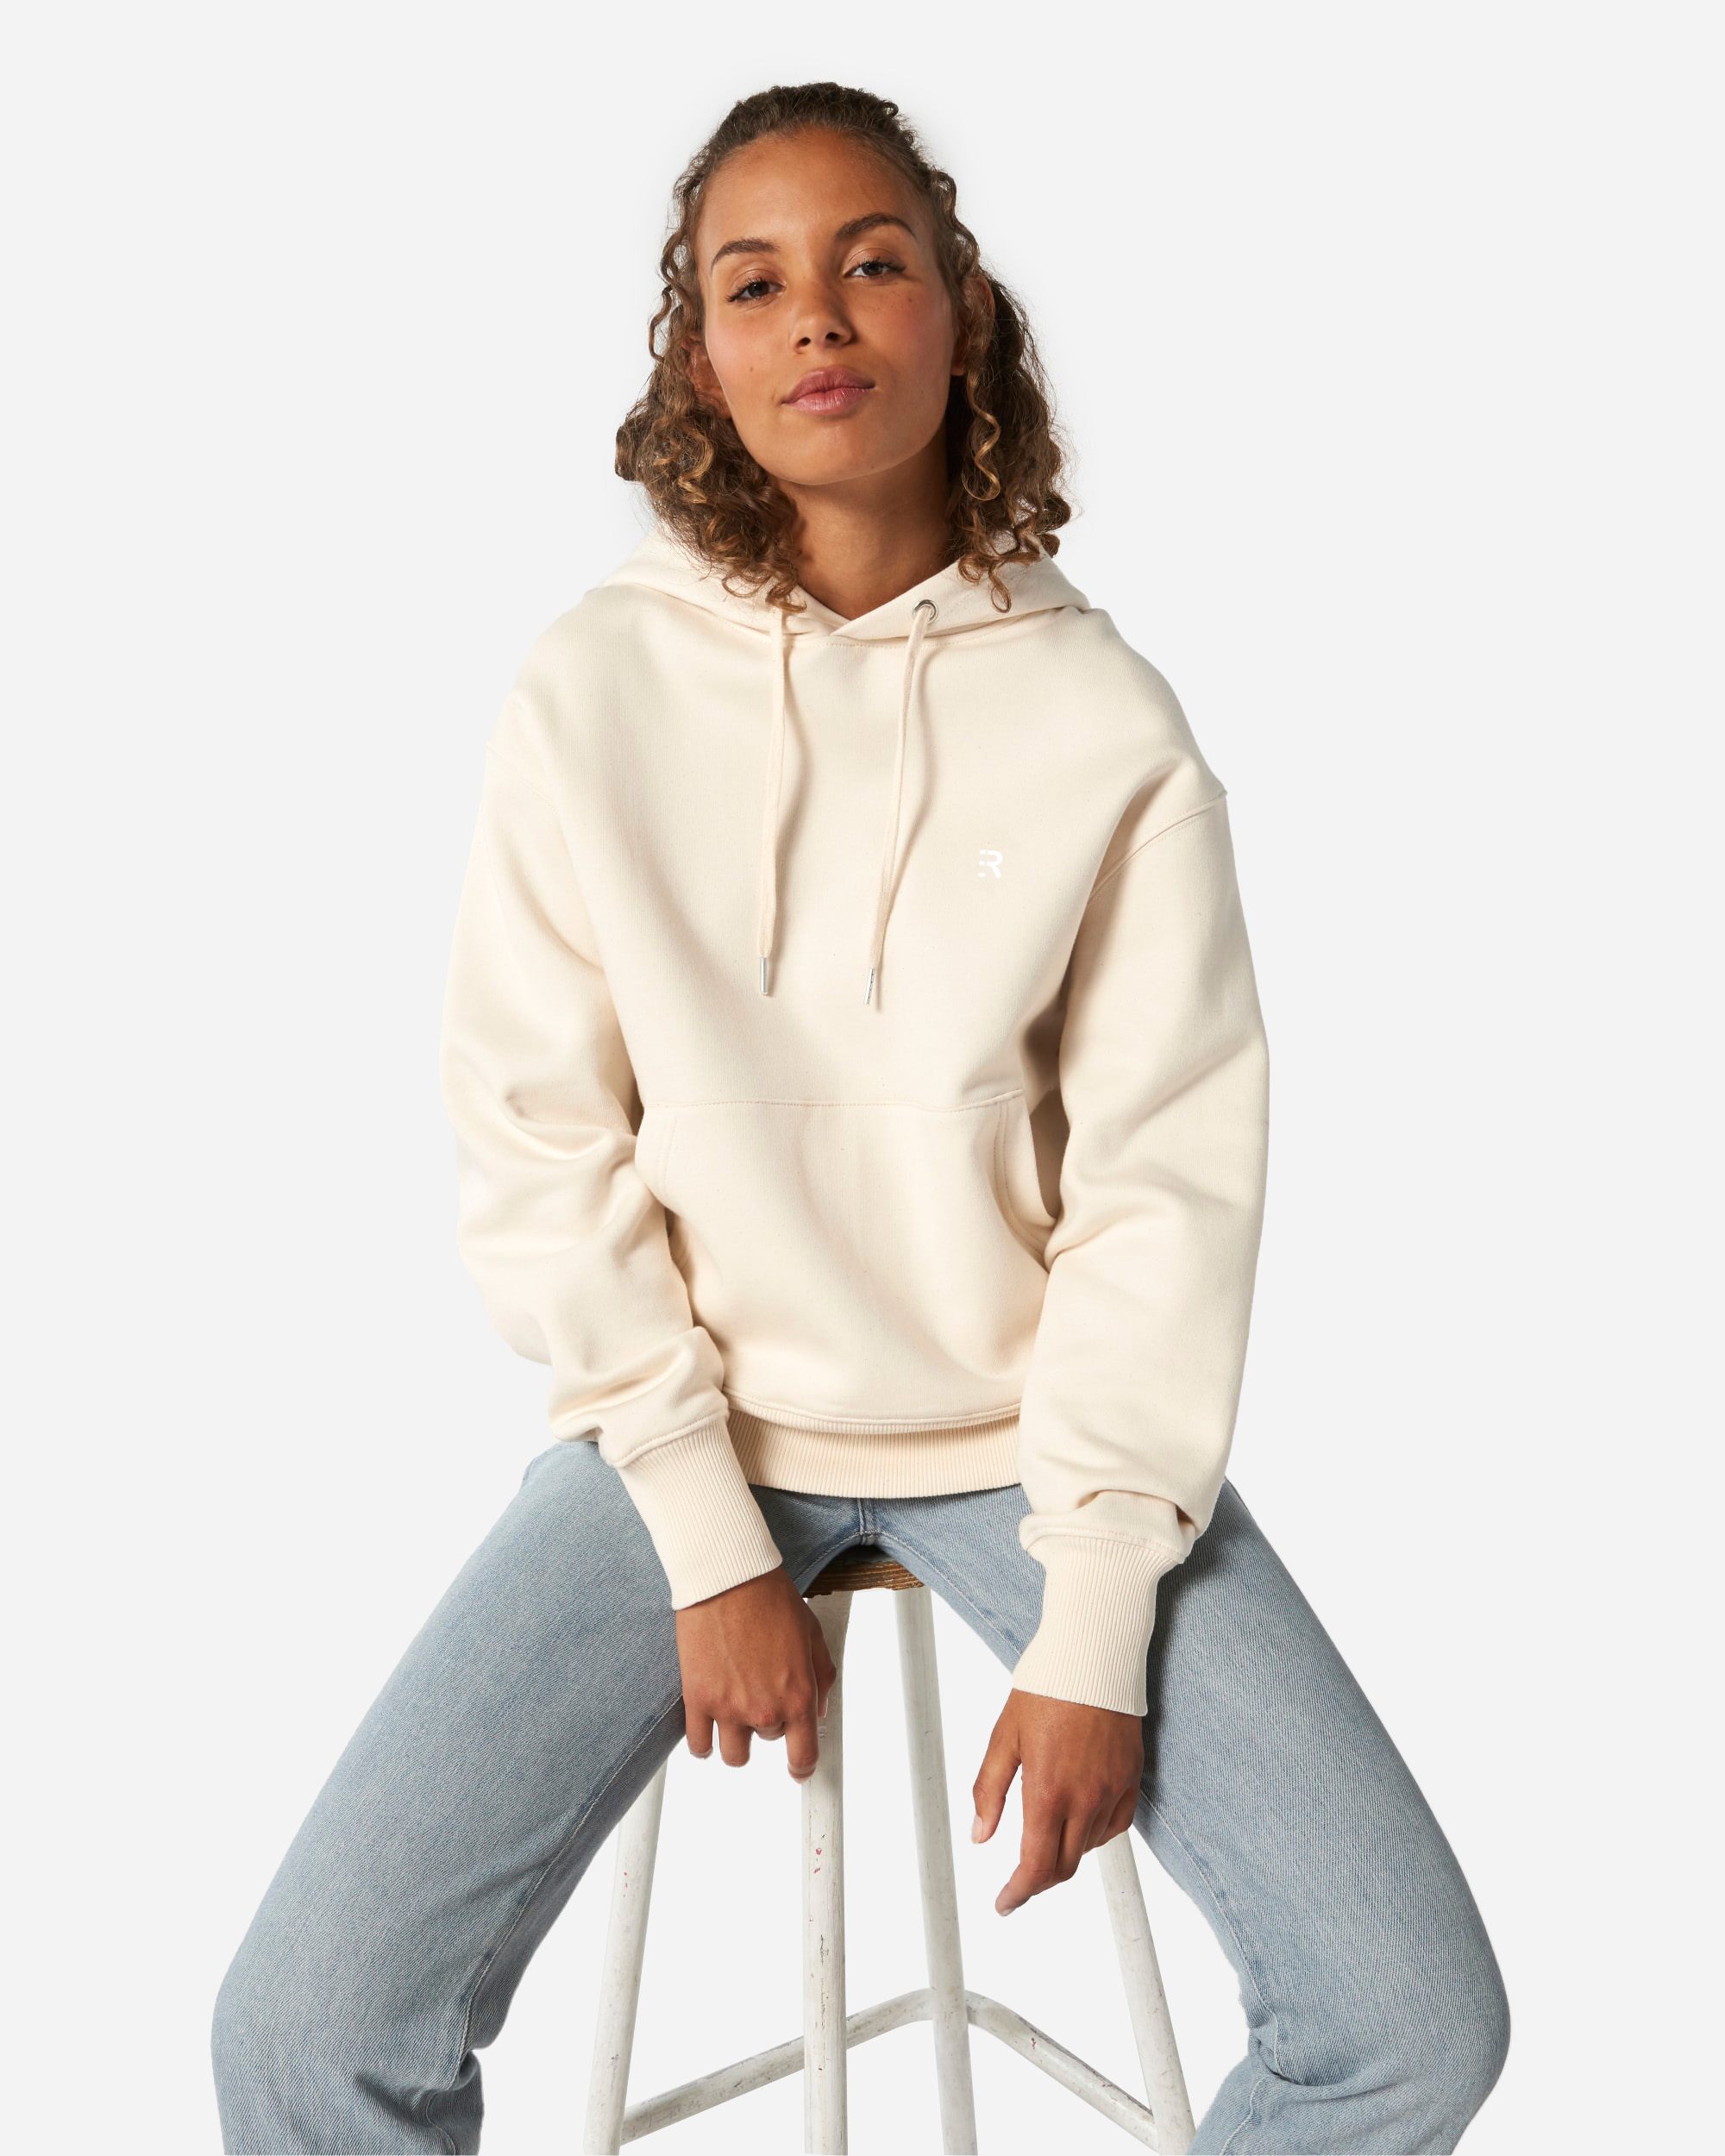 women’s hoodie sweatshirts. Relaxed fit and soft medium-thickness fabric. This hoodie sweatshirt is perfect for everyday use.